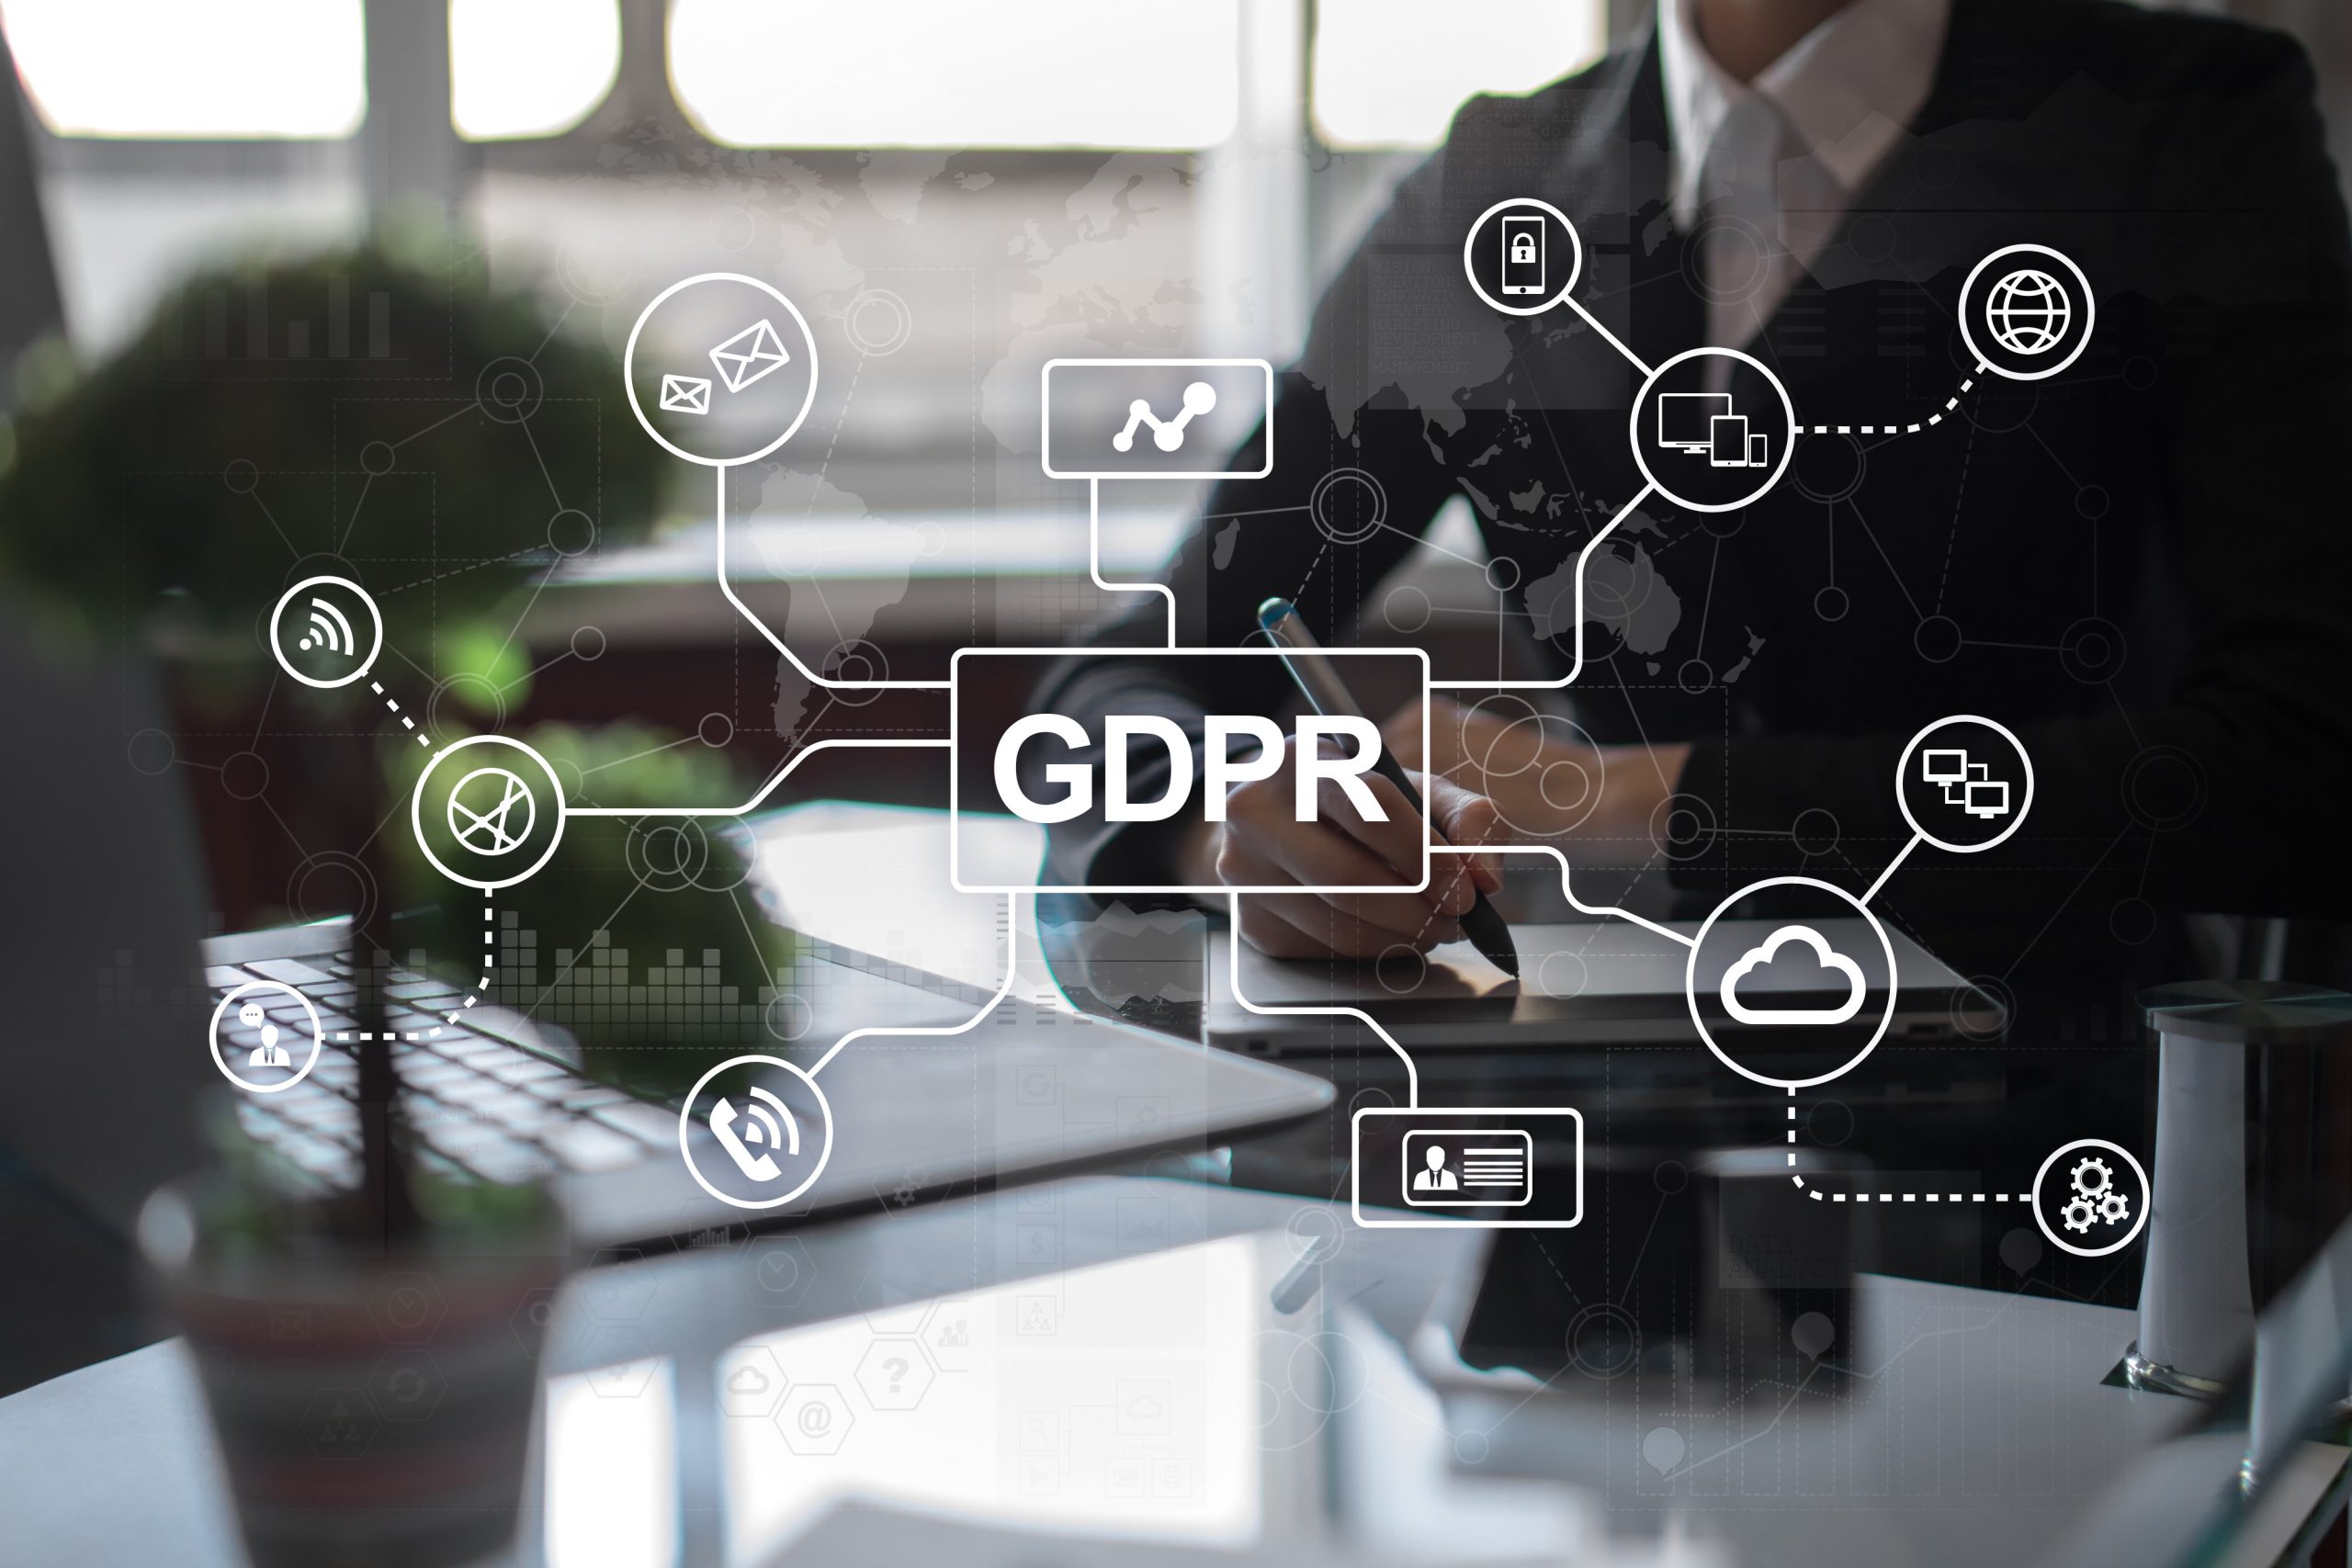 GDPR: What It Means For Your Business